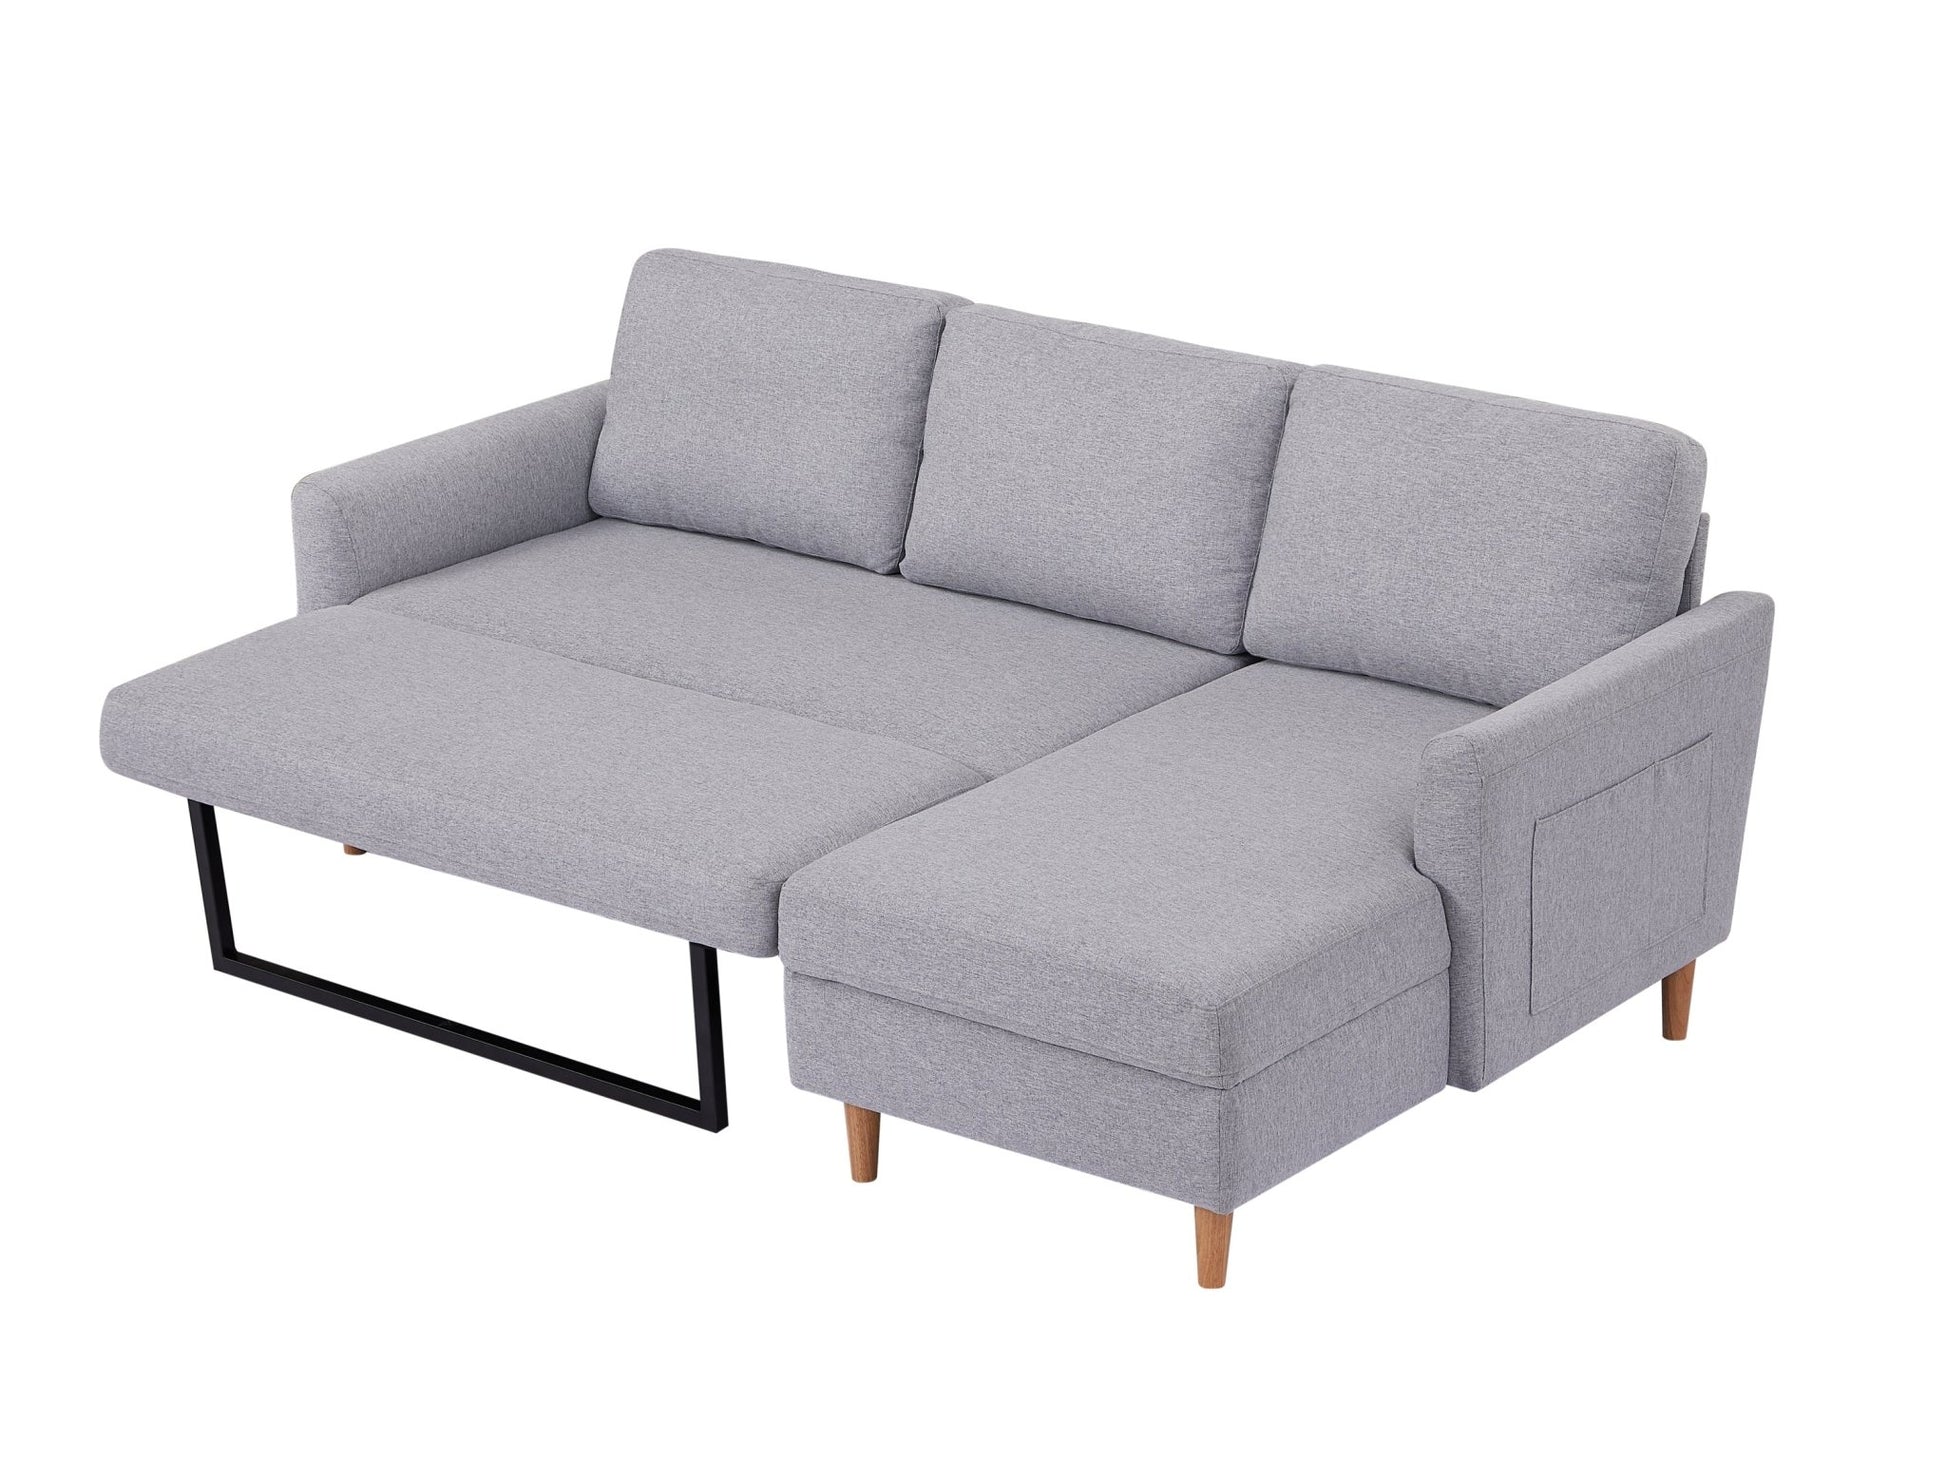 Adjustable L-Shaped Sofa Bed With Chaise Light Grey, Upholstered Fabric Sleeper Sectional Sofa with Chaise Modern Craftsmanship Fashion Sofa Set, Apartment Living Room Sofa with for Small Space - Groovy Boardz